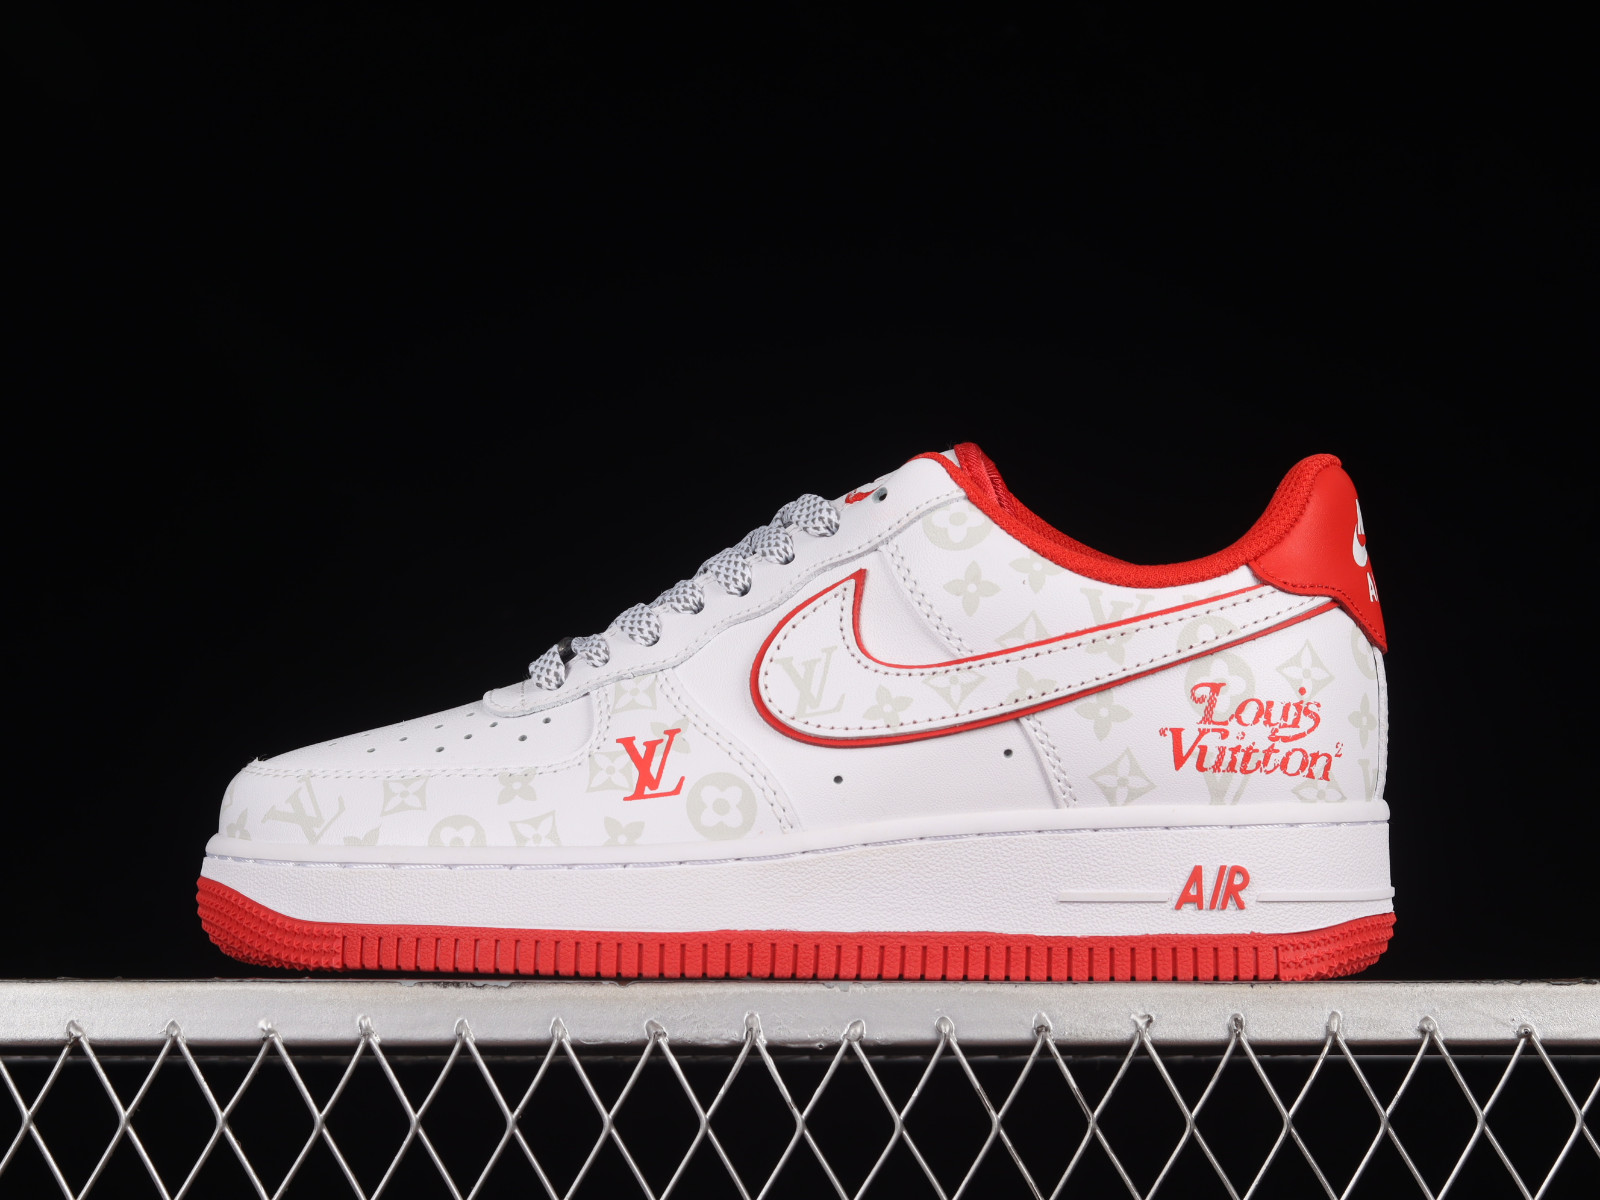 Louis Vuitton x Nike Air Force 1 07 Low White Red Shoes Sneakers